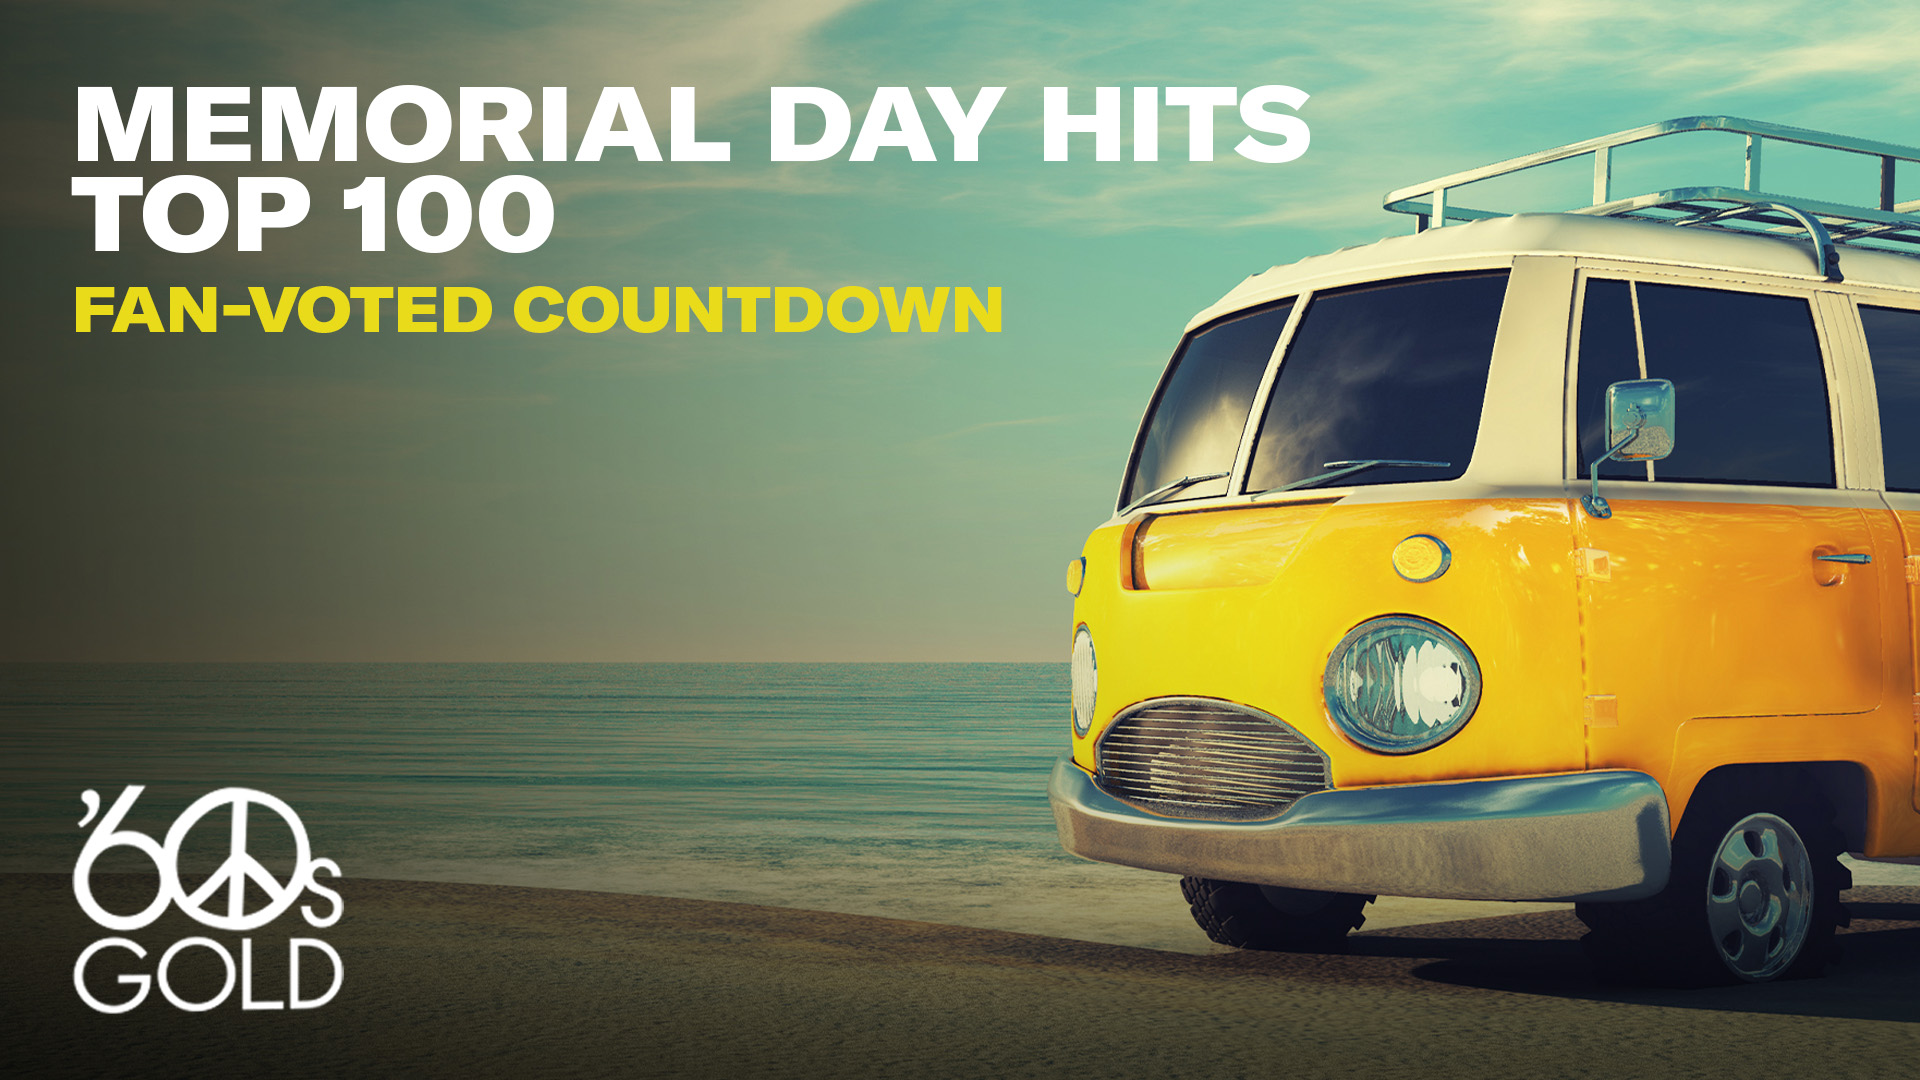 Memorial Day Hits Top 100 Fan-voted Countdown on 60s Gold